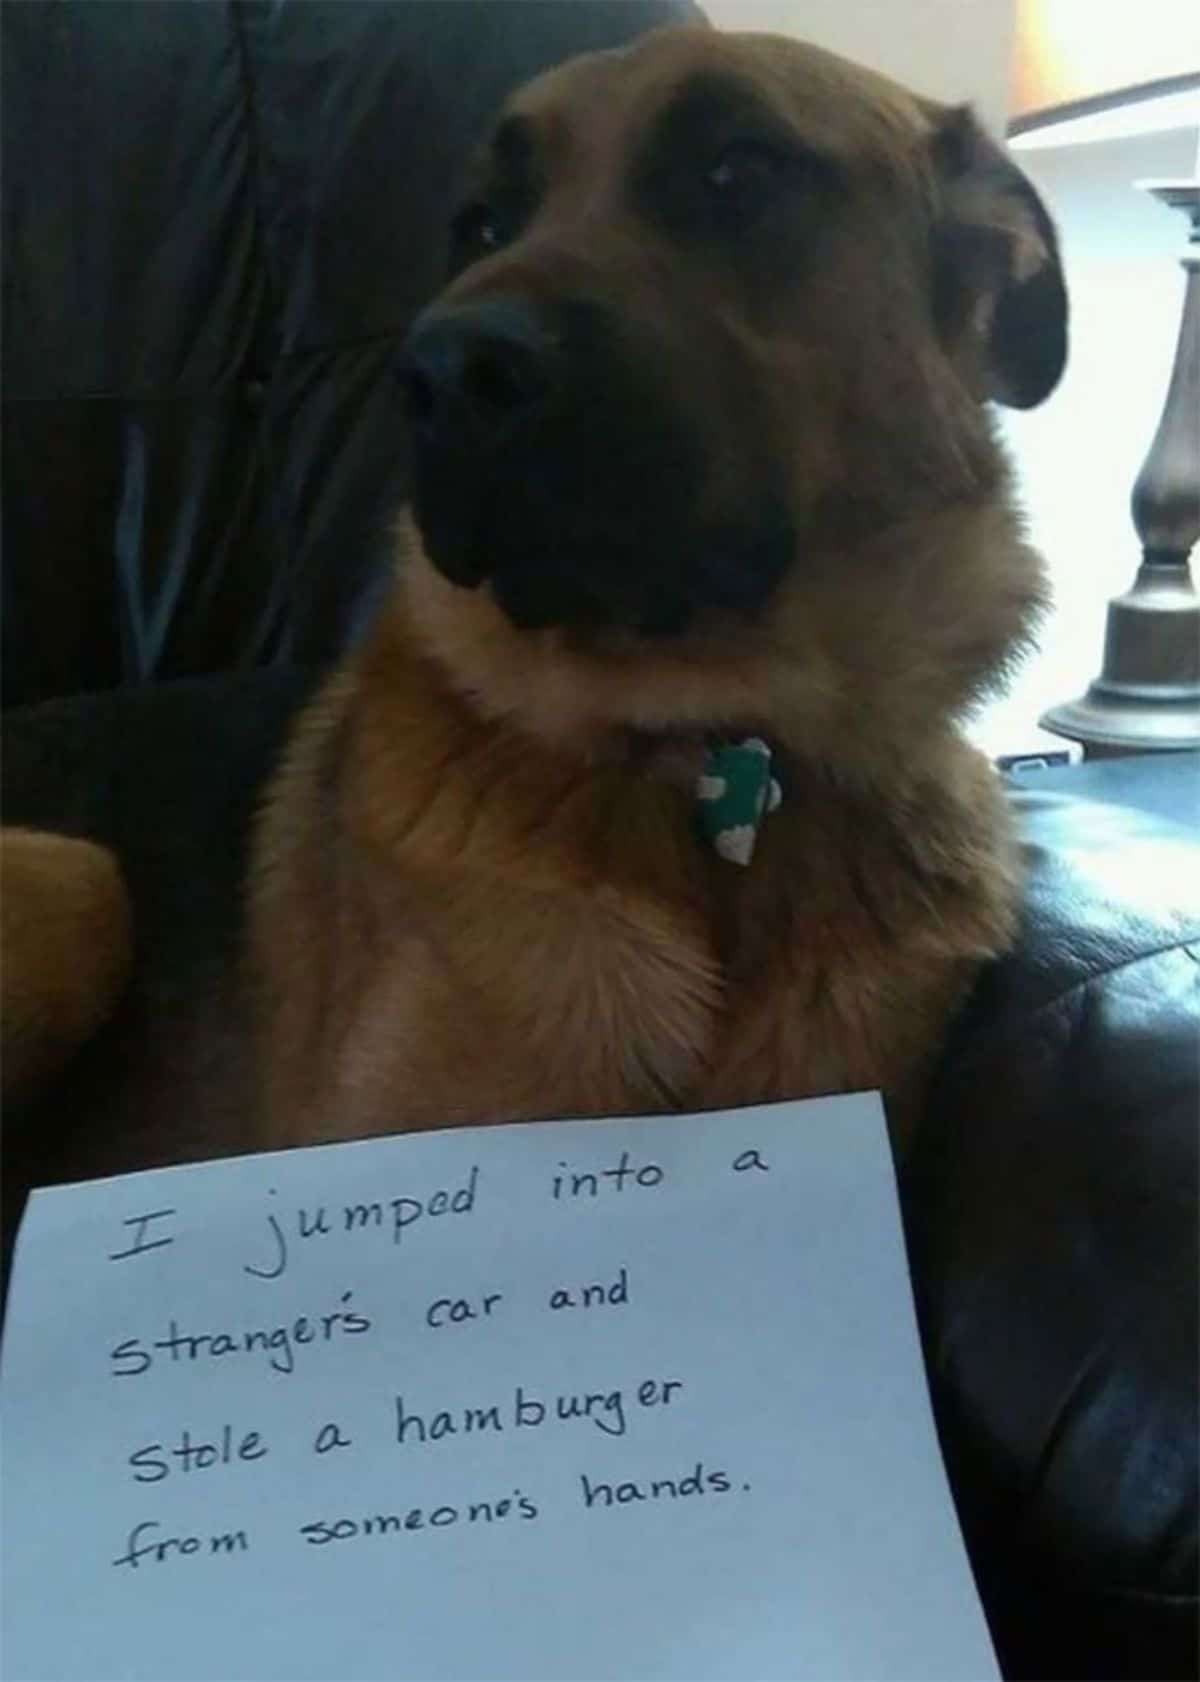 brown and black german shepherd sitting on a lap with a note saying the dog jumped into someone's car and stole someone's hamburger